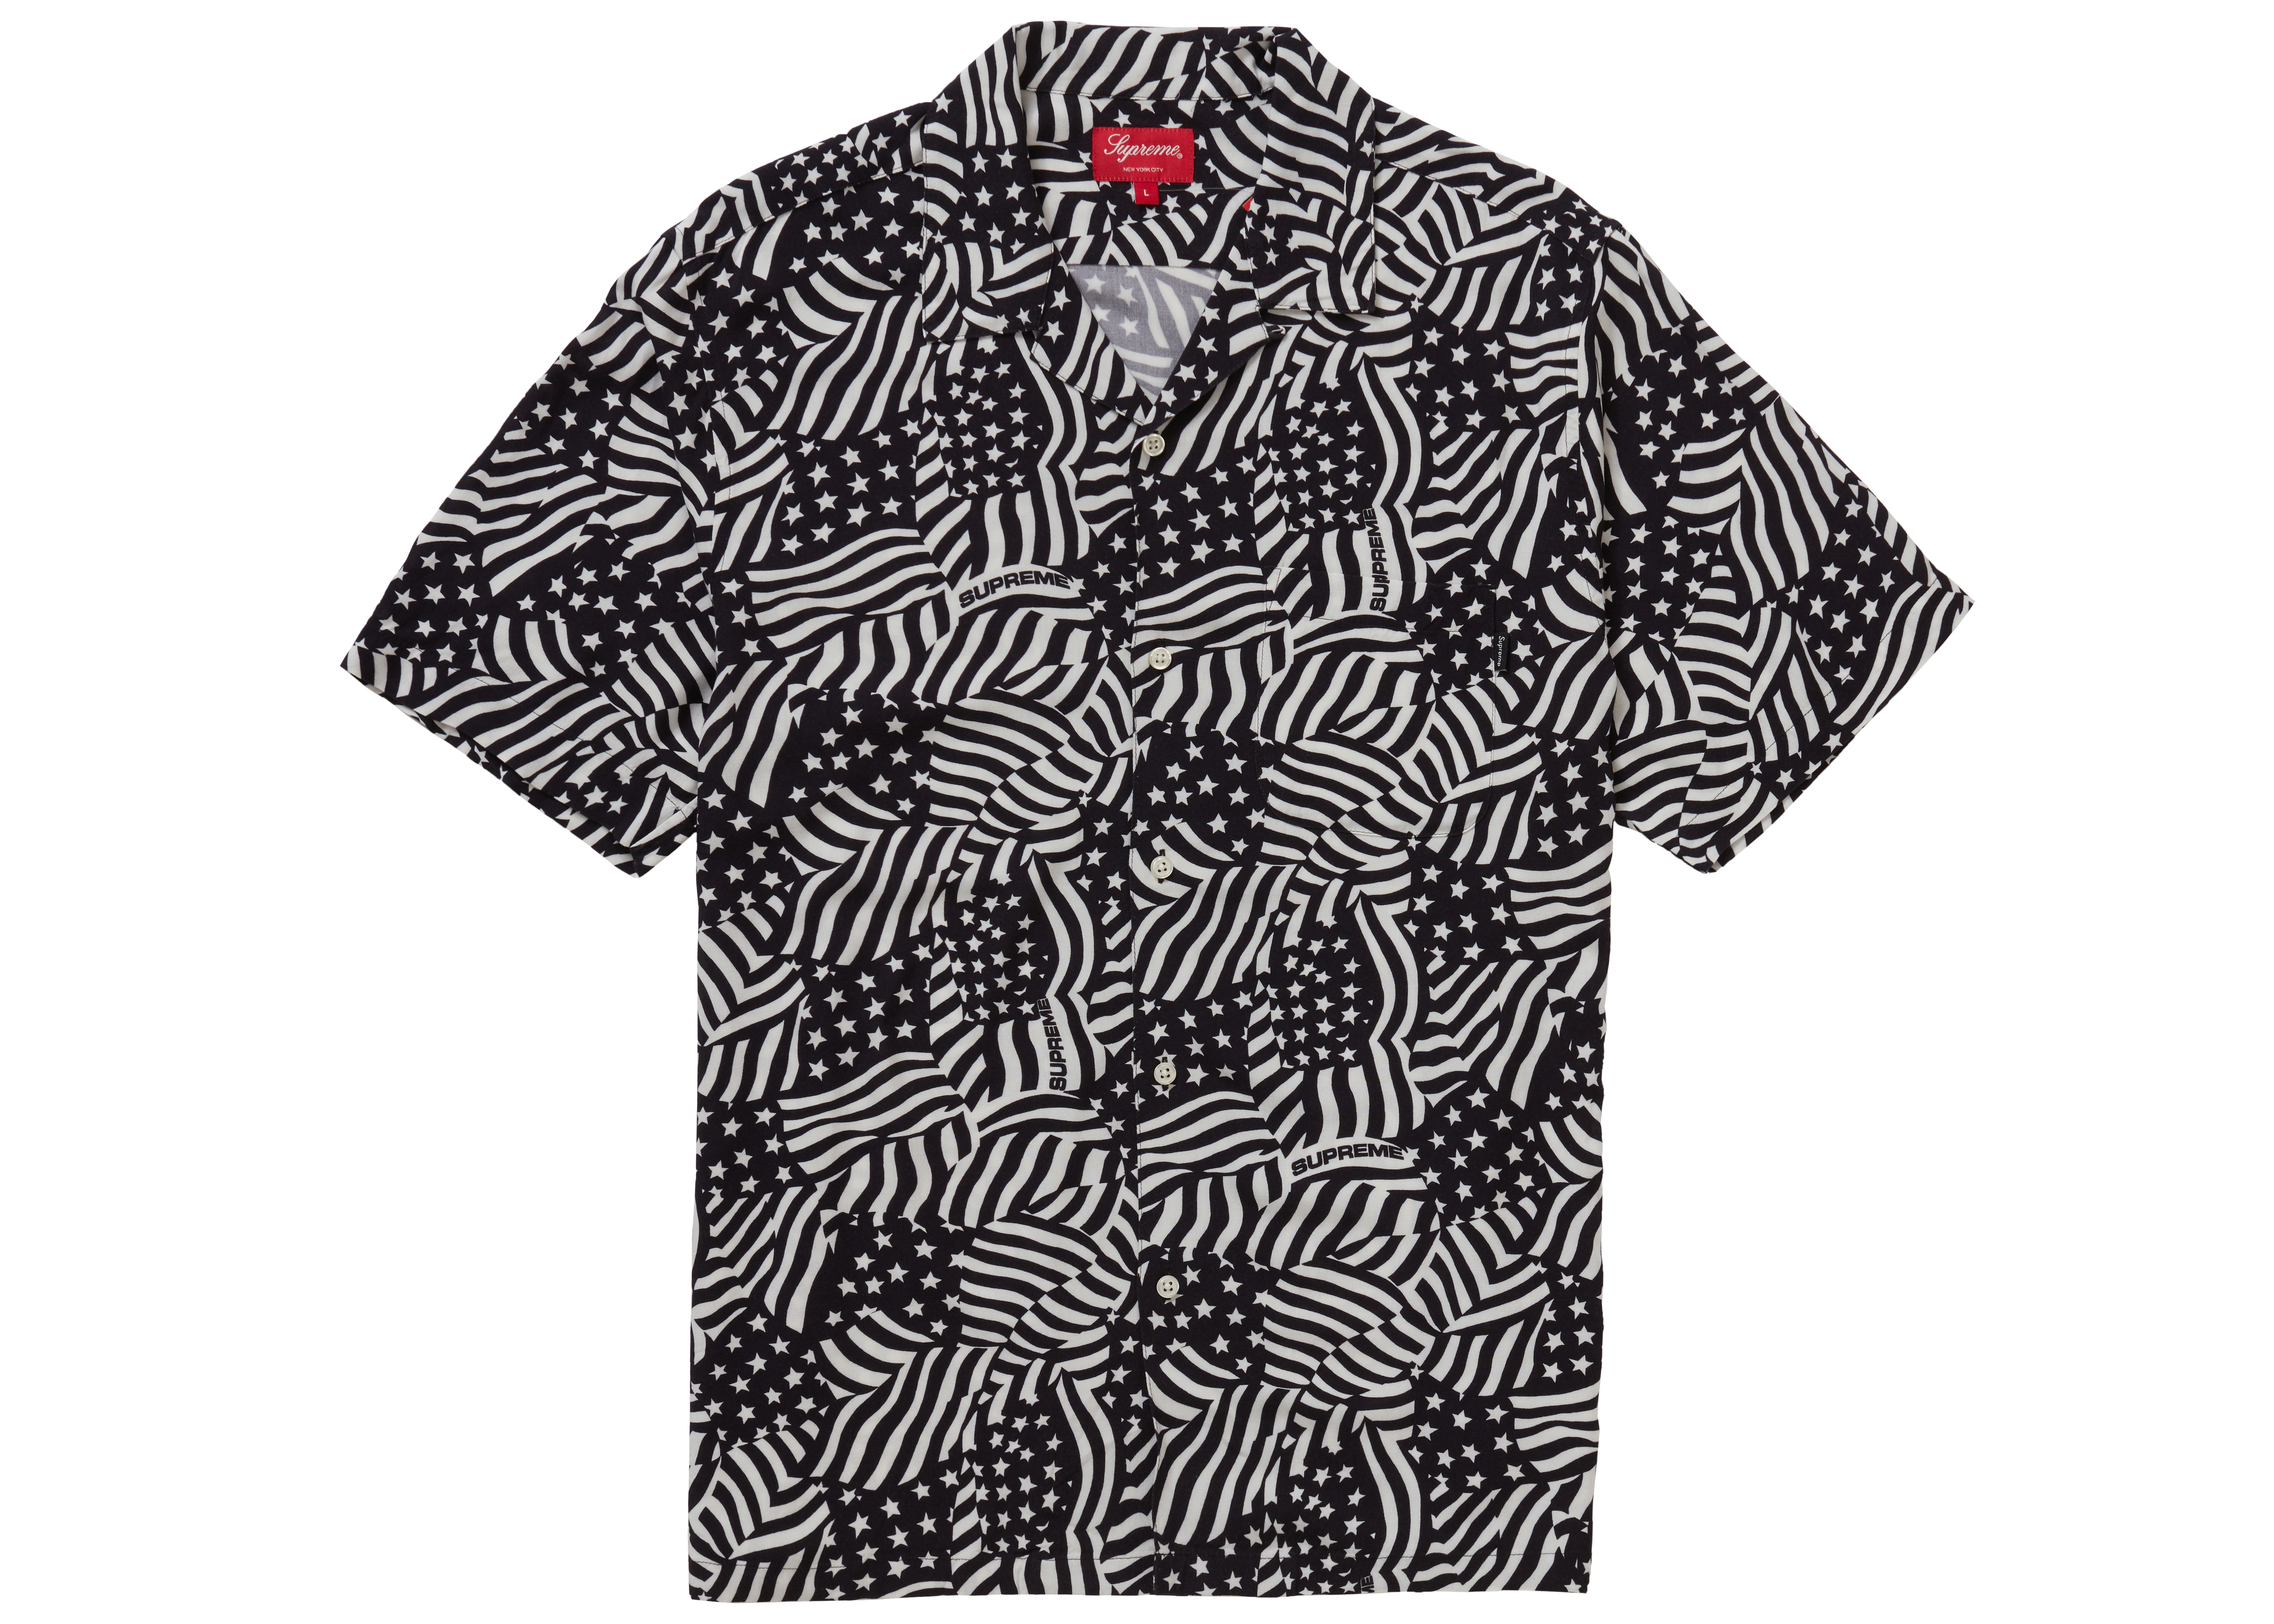 Supreme Flags Rayon S/S Shirt Black Flags Men's - SS20 - US